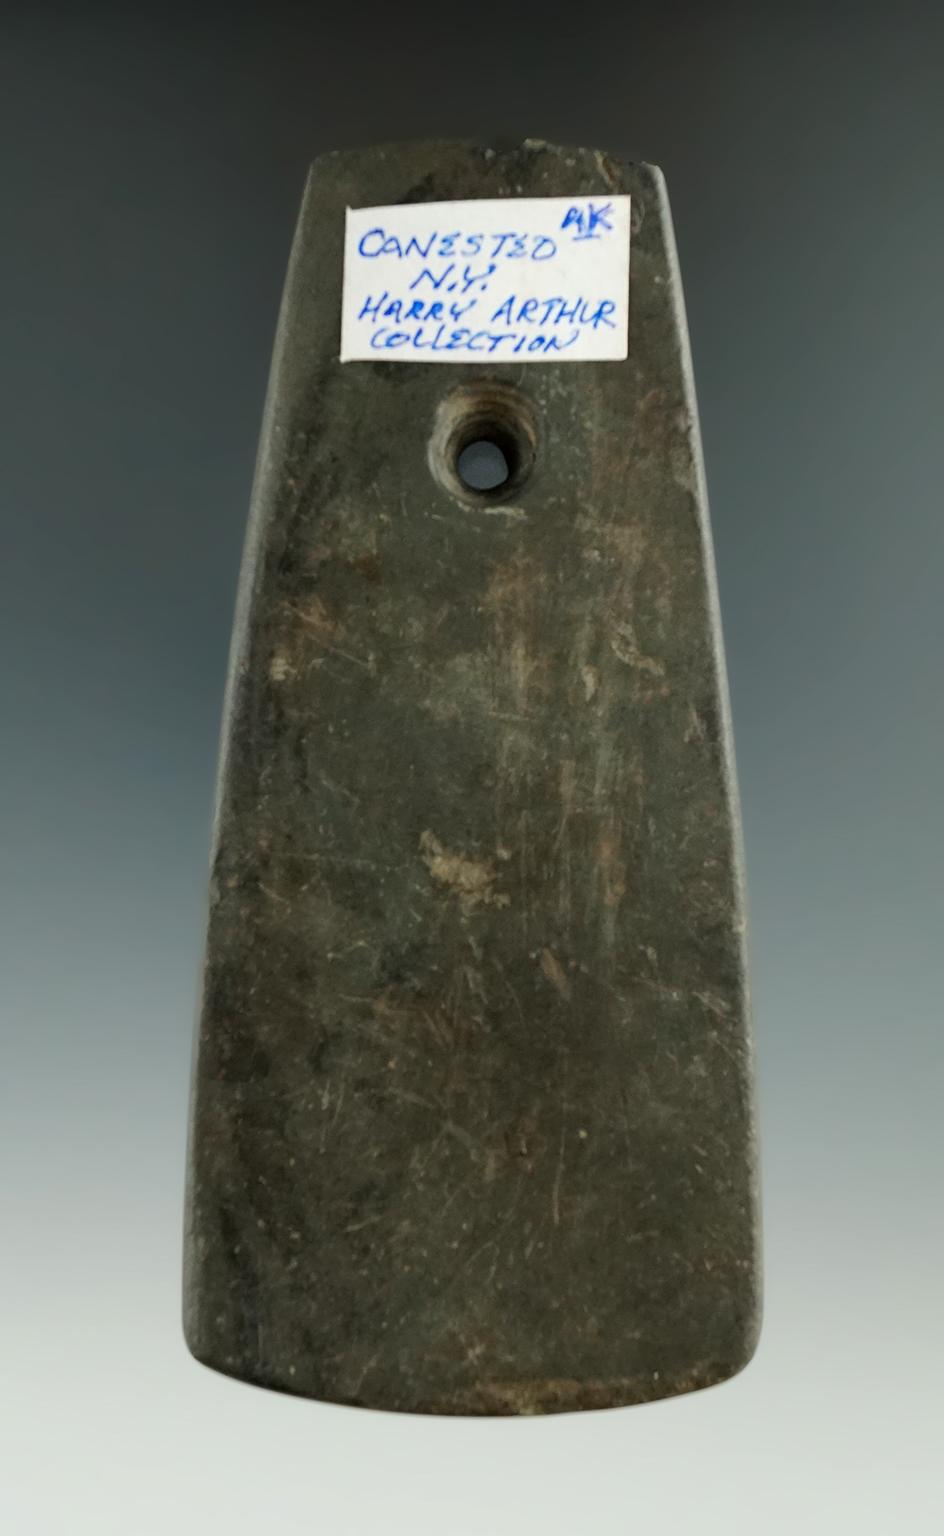 4 1/2" banded slate Trapezoidal Pendant found in Canesteo, New York.   Ex. Harry Arthur.